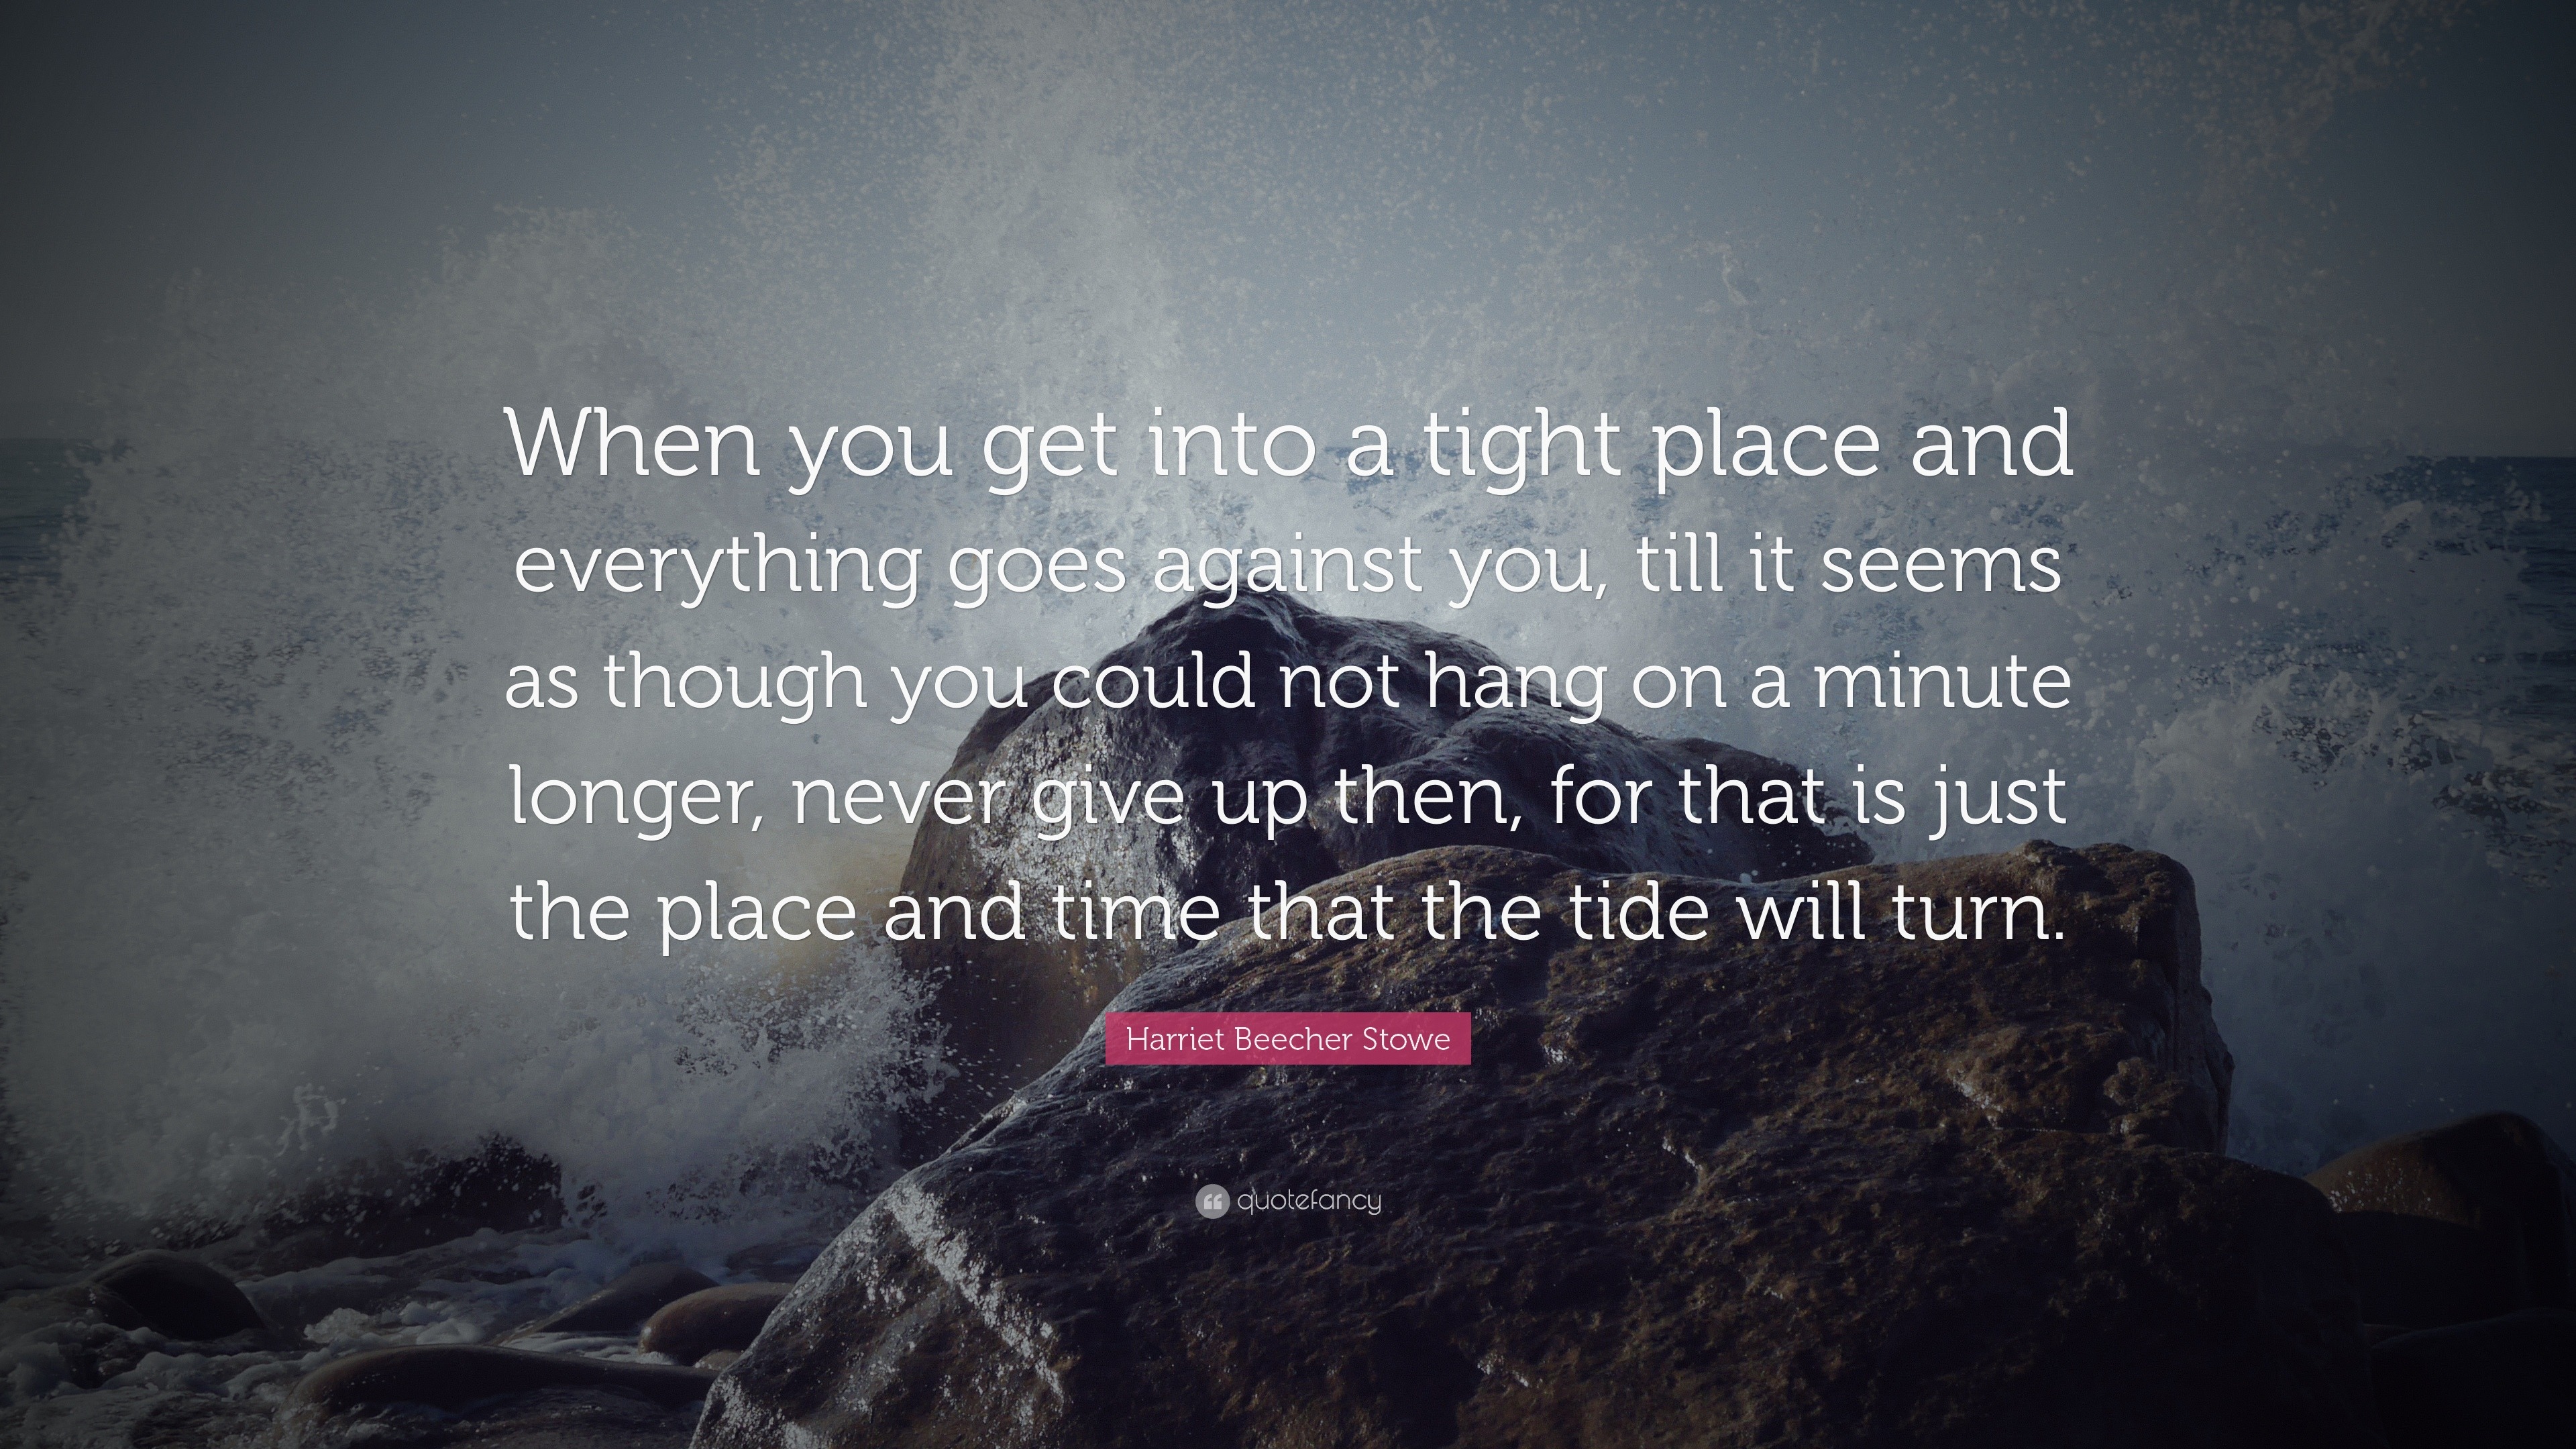 Harriet Beecher Stowe Quote: “When you get into a tight place and